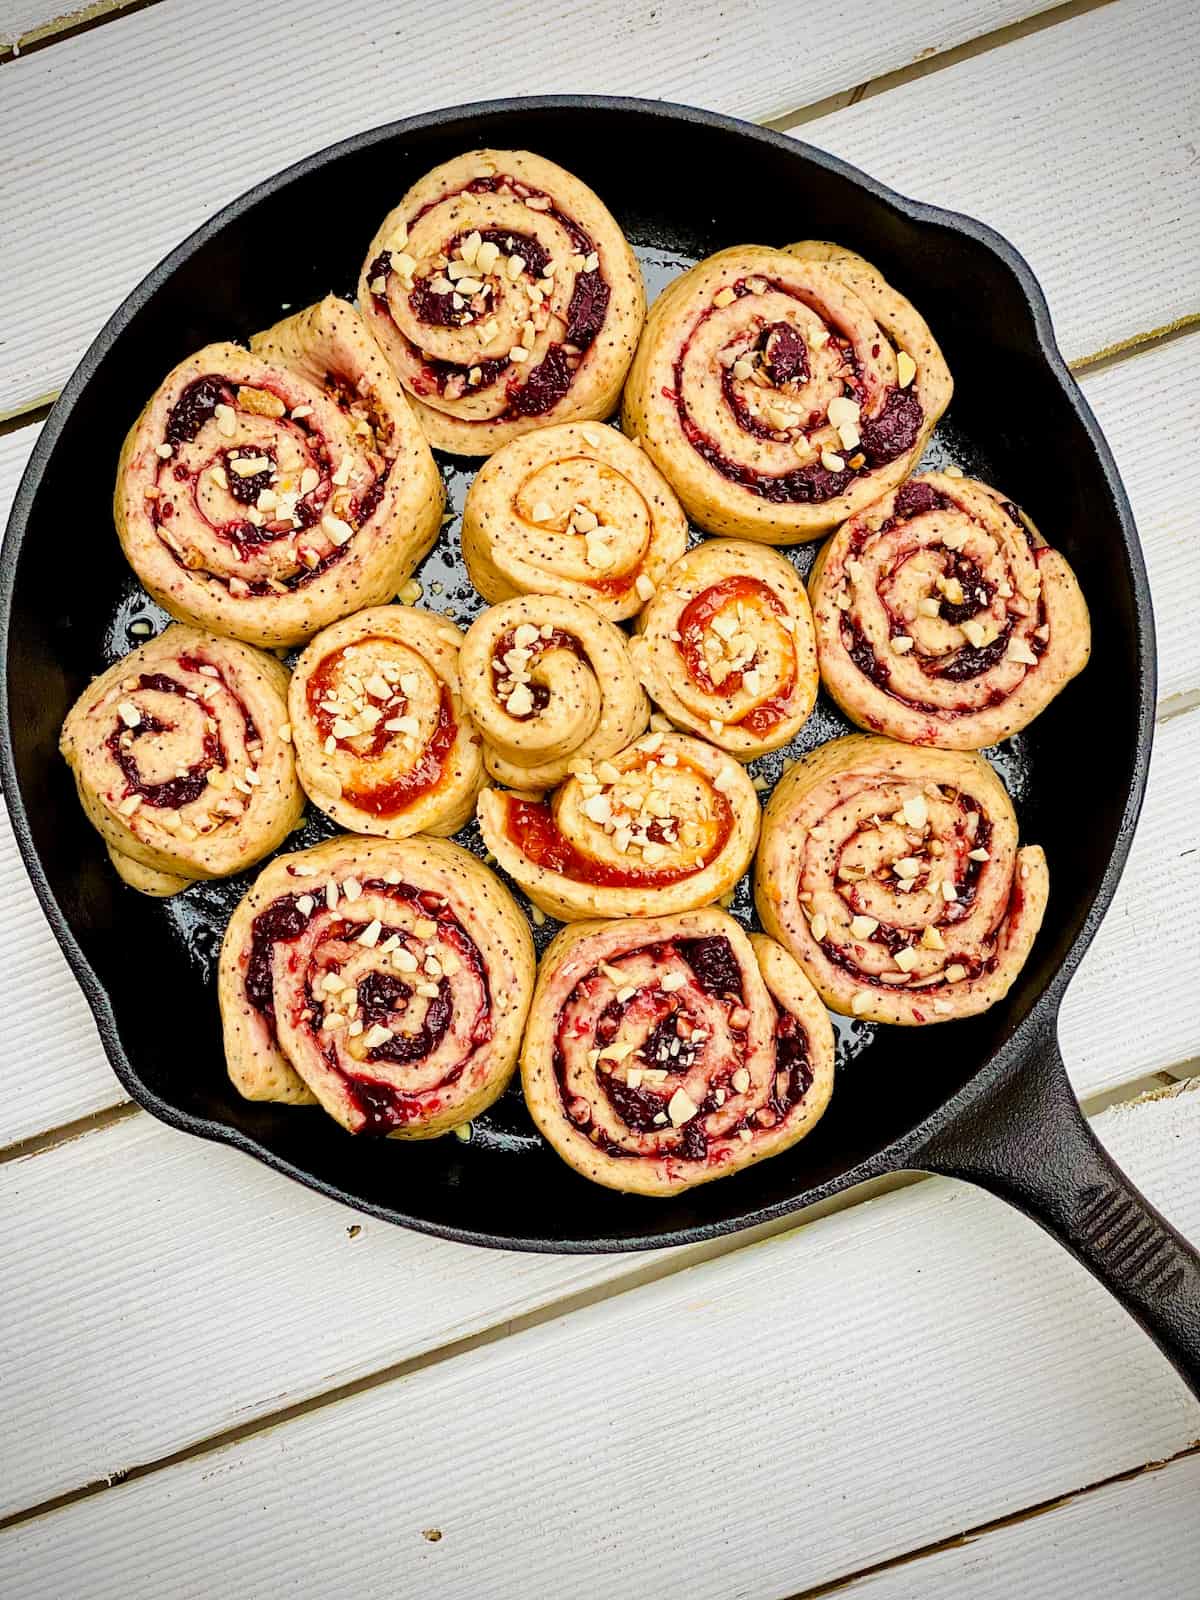 Perfect cinnamon rolls with homemade jam ready to bake